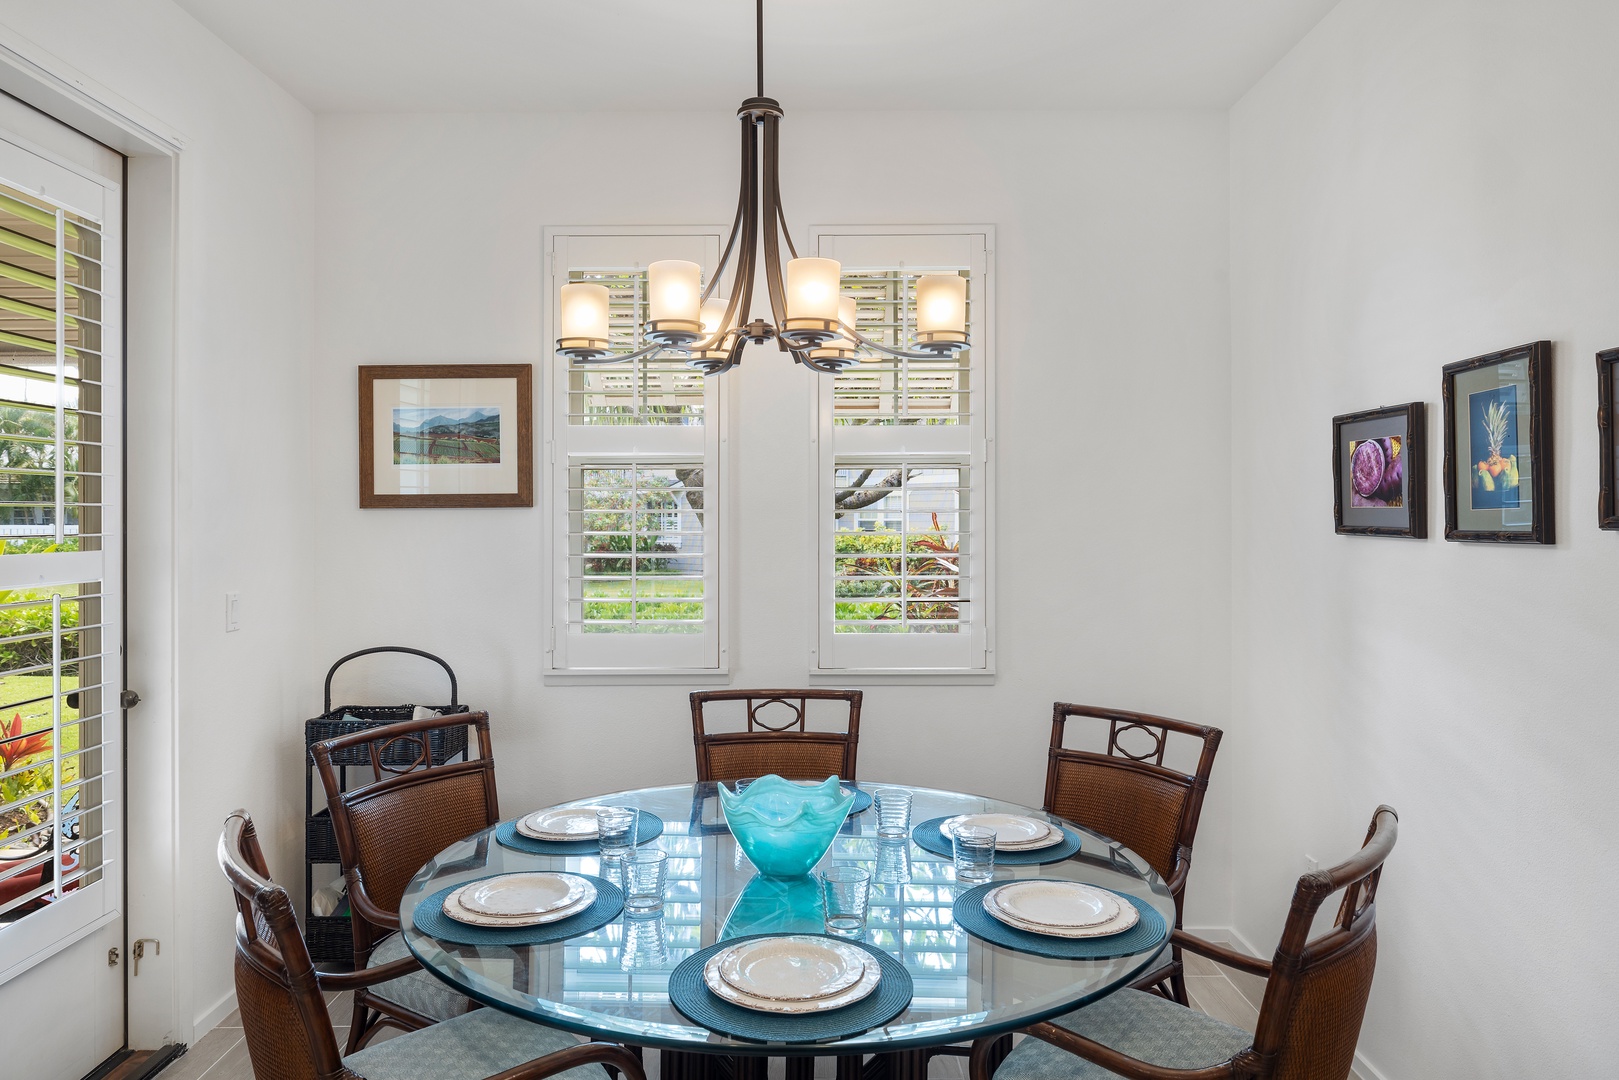 Kapolei Vacation Rentals, Coconut Plantation 1190-1 - An elegant stay in a tastefully decorated dining area.